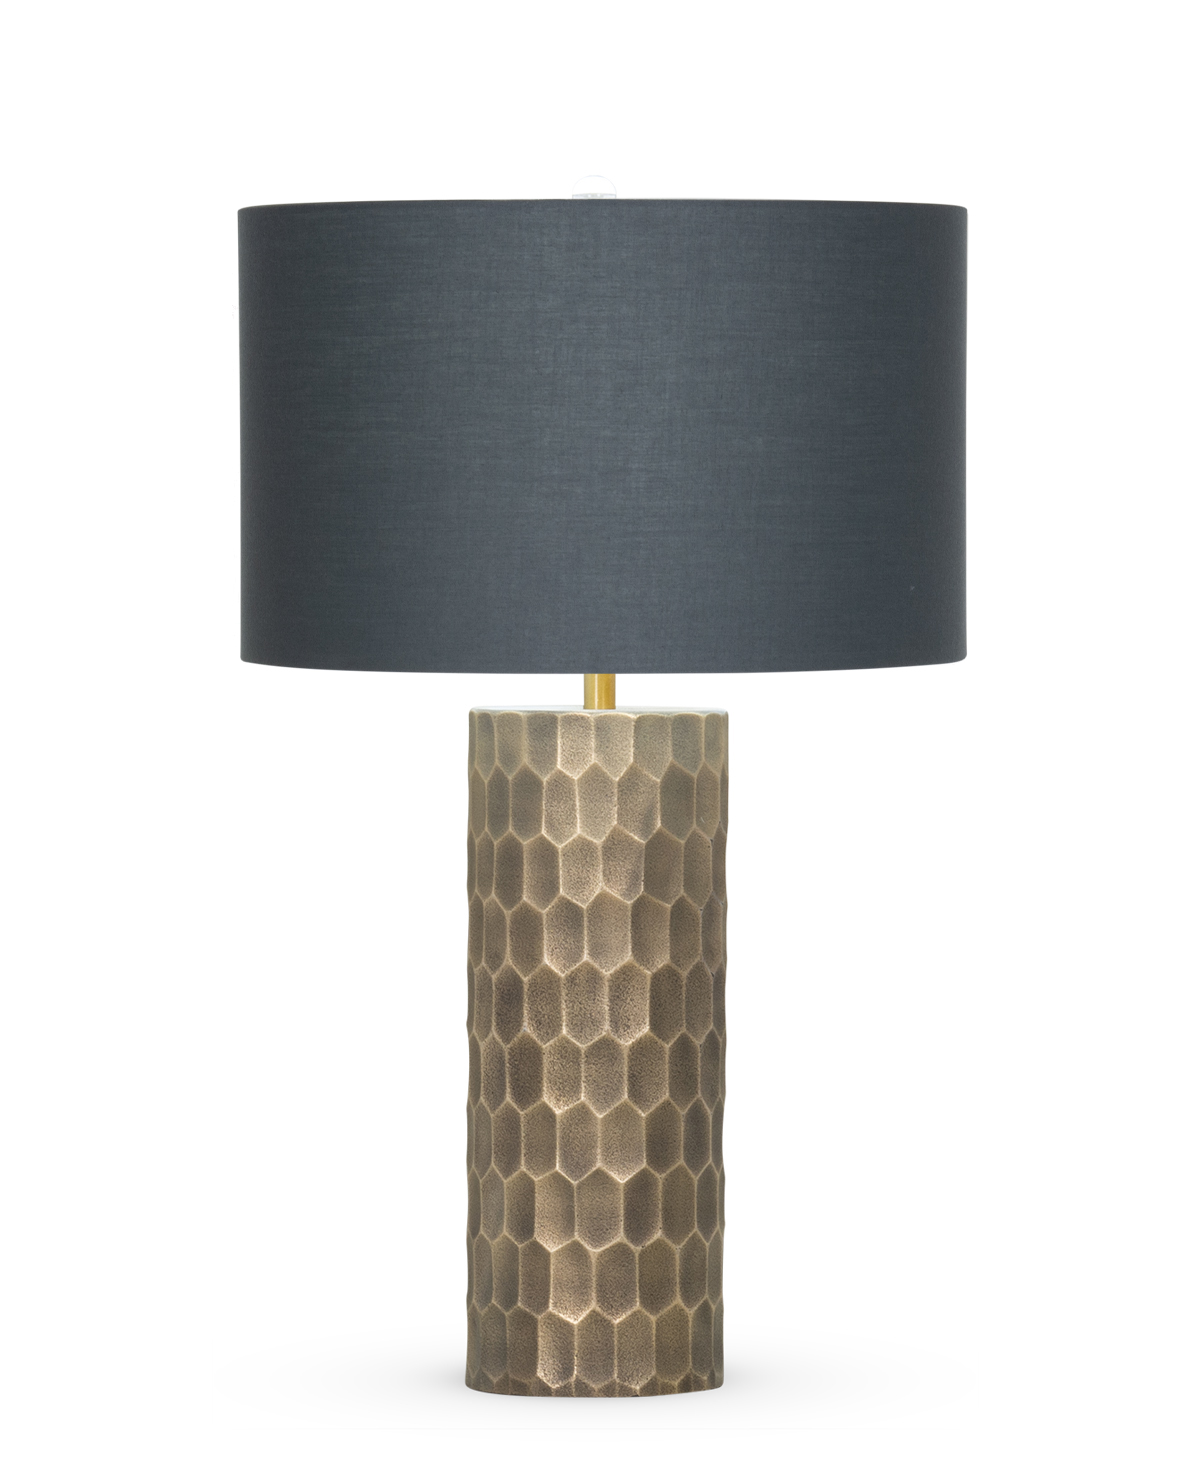 FlowDecor Ireland Table Lamp in mouth-blown glass with dark hand-etched brass plated finish and charcoal grey cotton drum shade (# 4402)